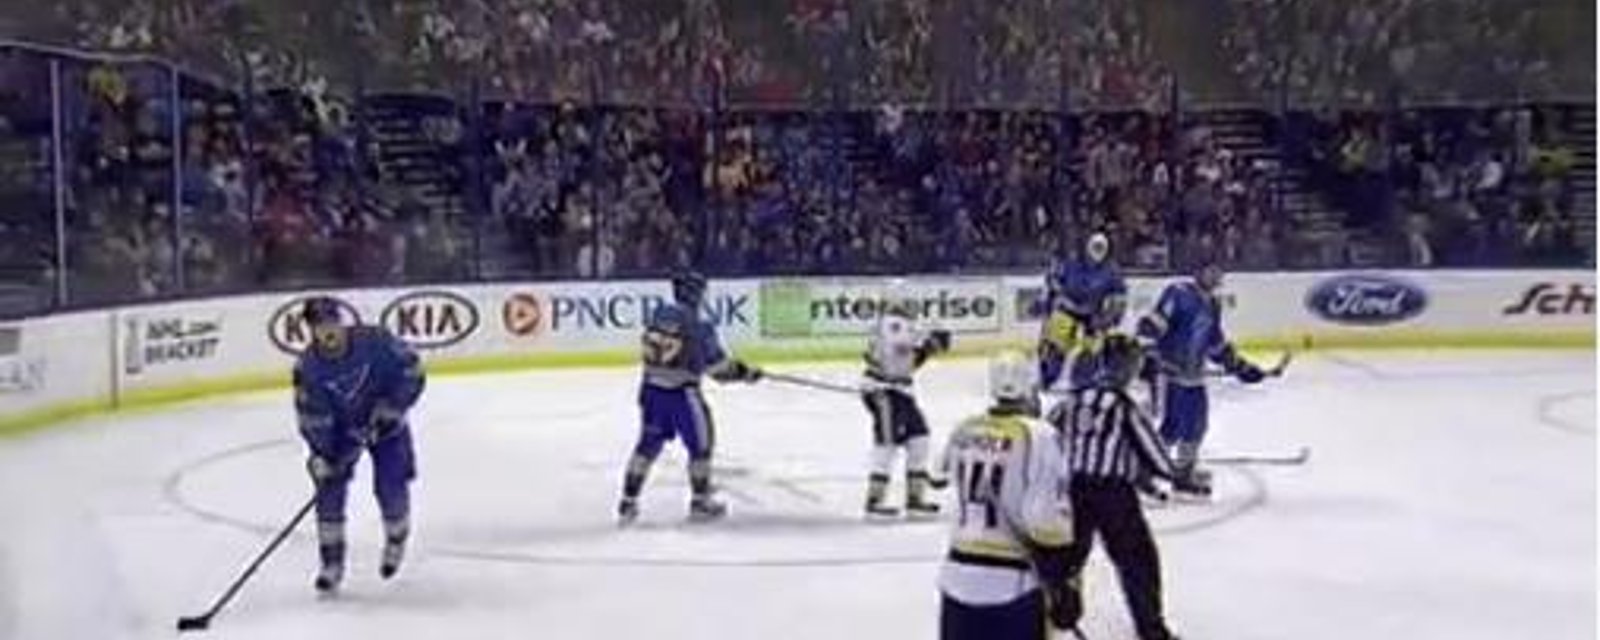 Blatant case of embellishment in St-Louis! 